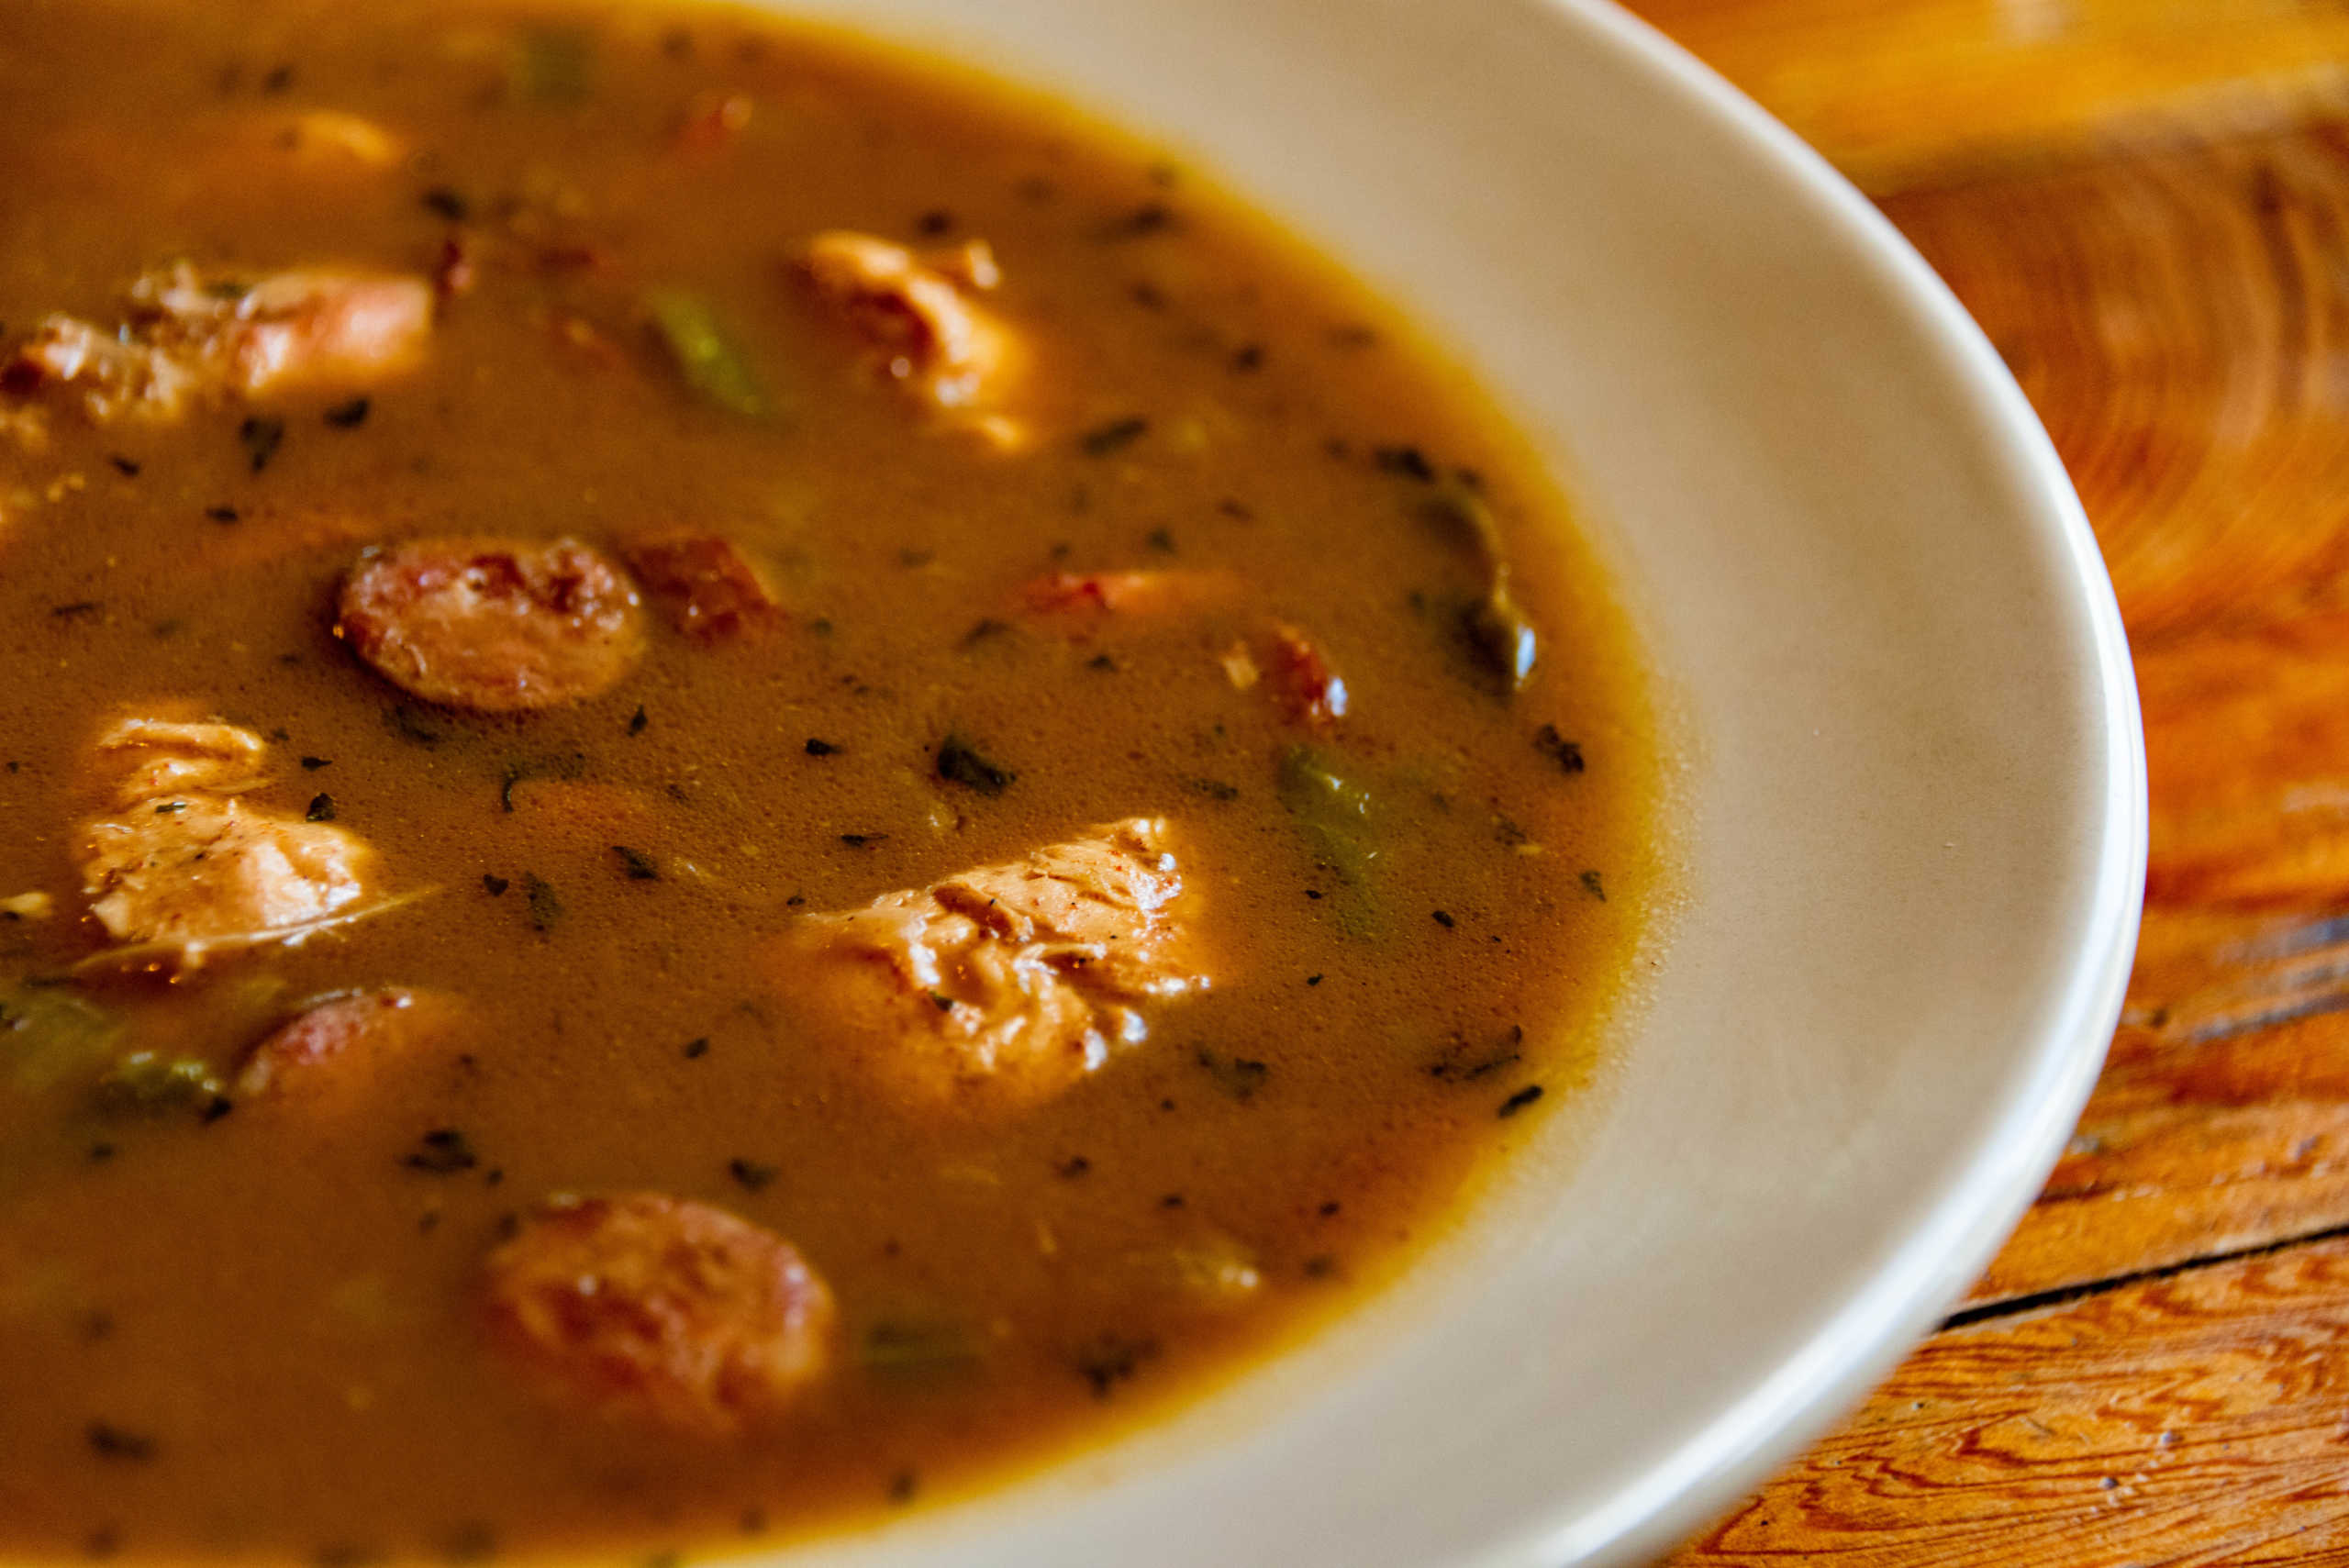 Eat a hot gumbo fresh from the pot at our local restaurants on the Andouille Trail